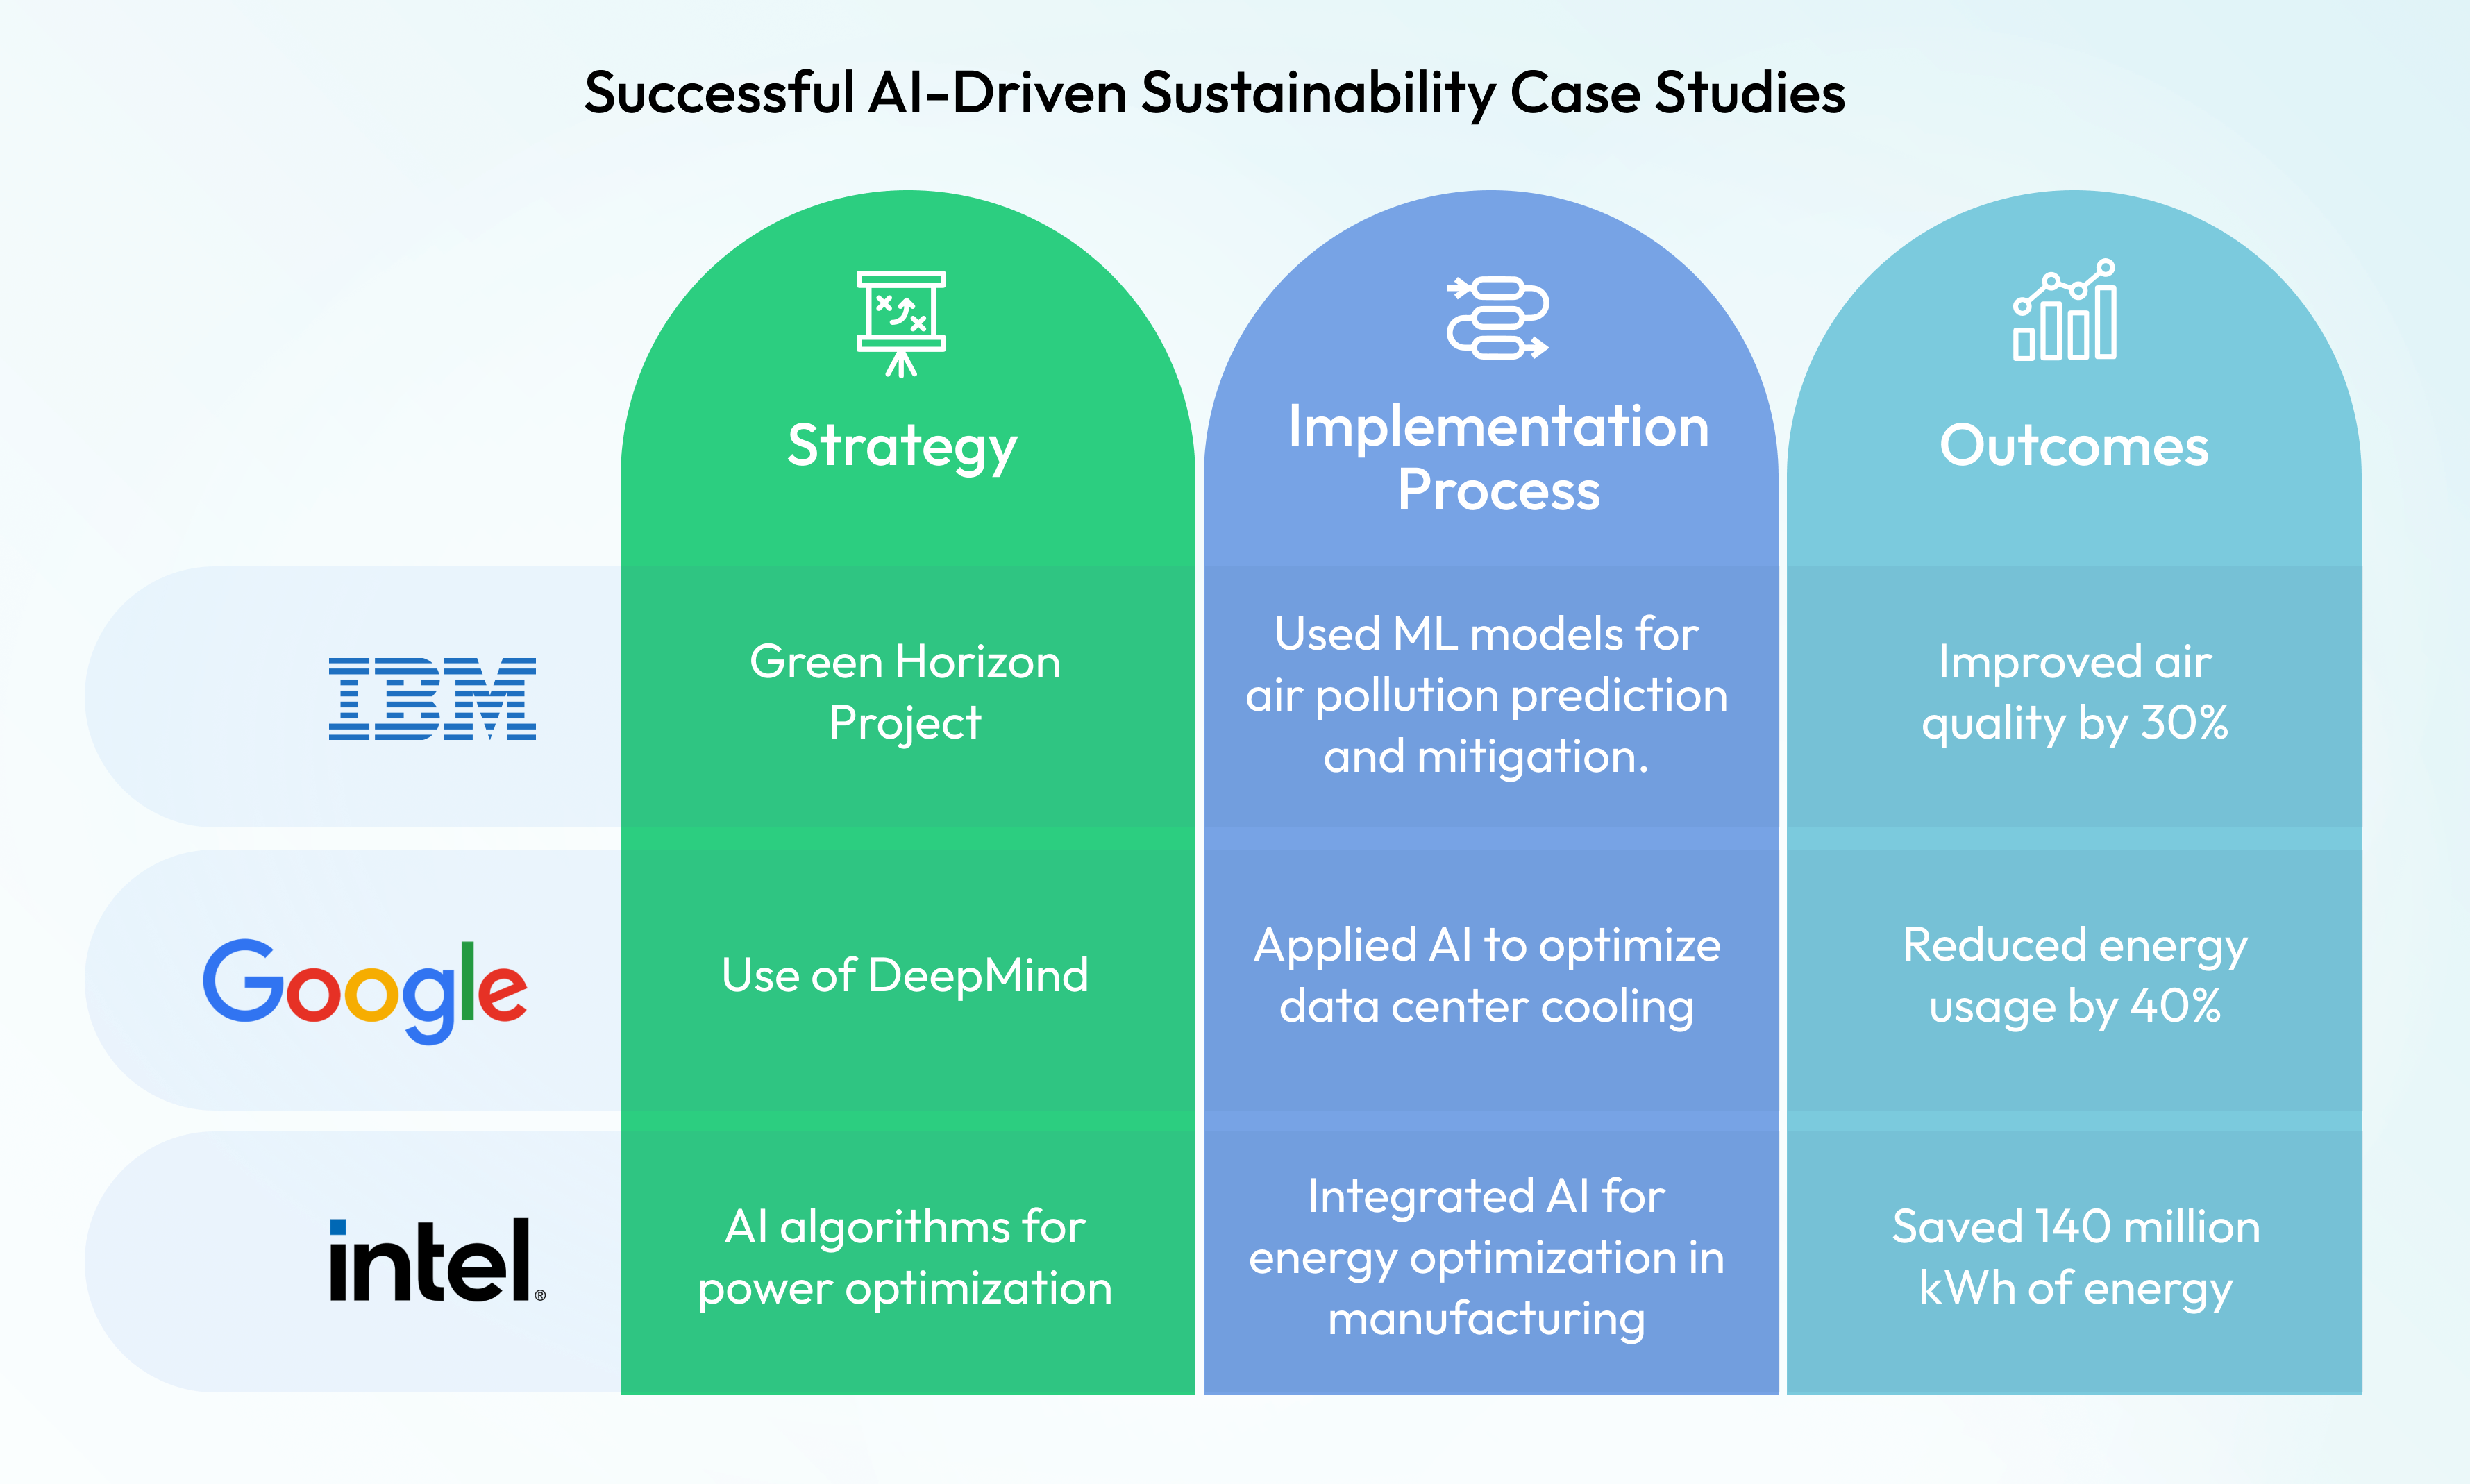 The Business Case for AI-Driven Sustainability